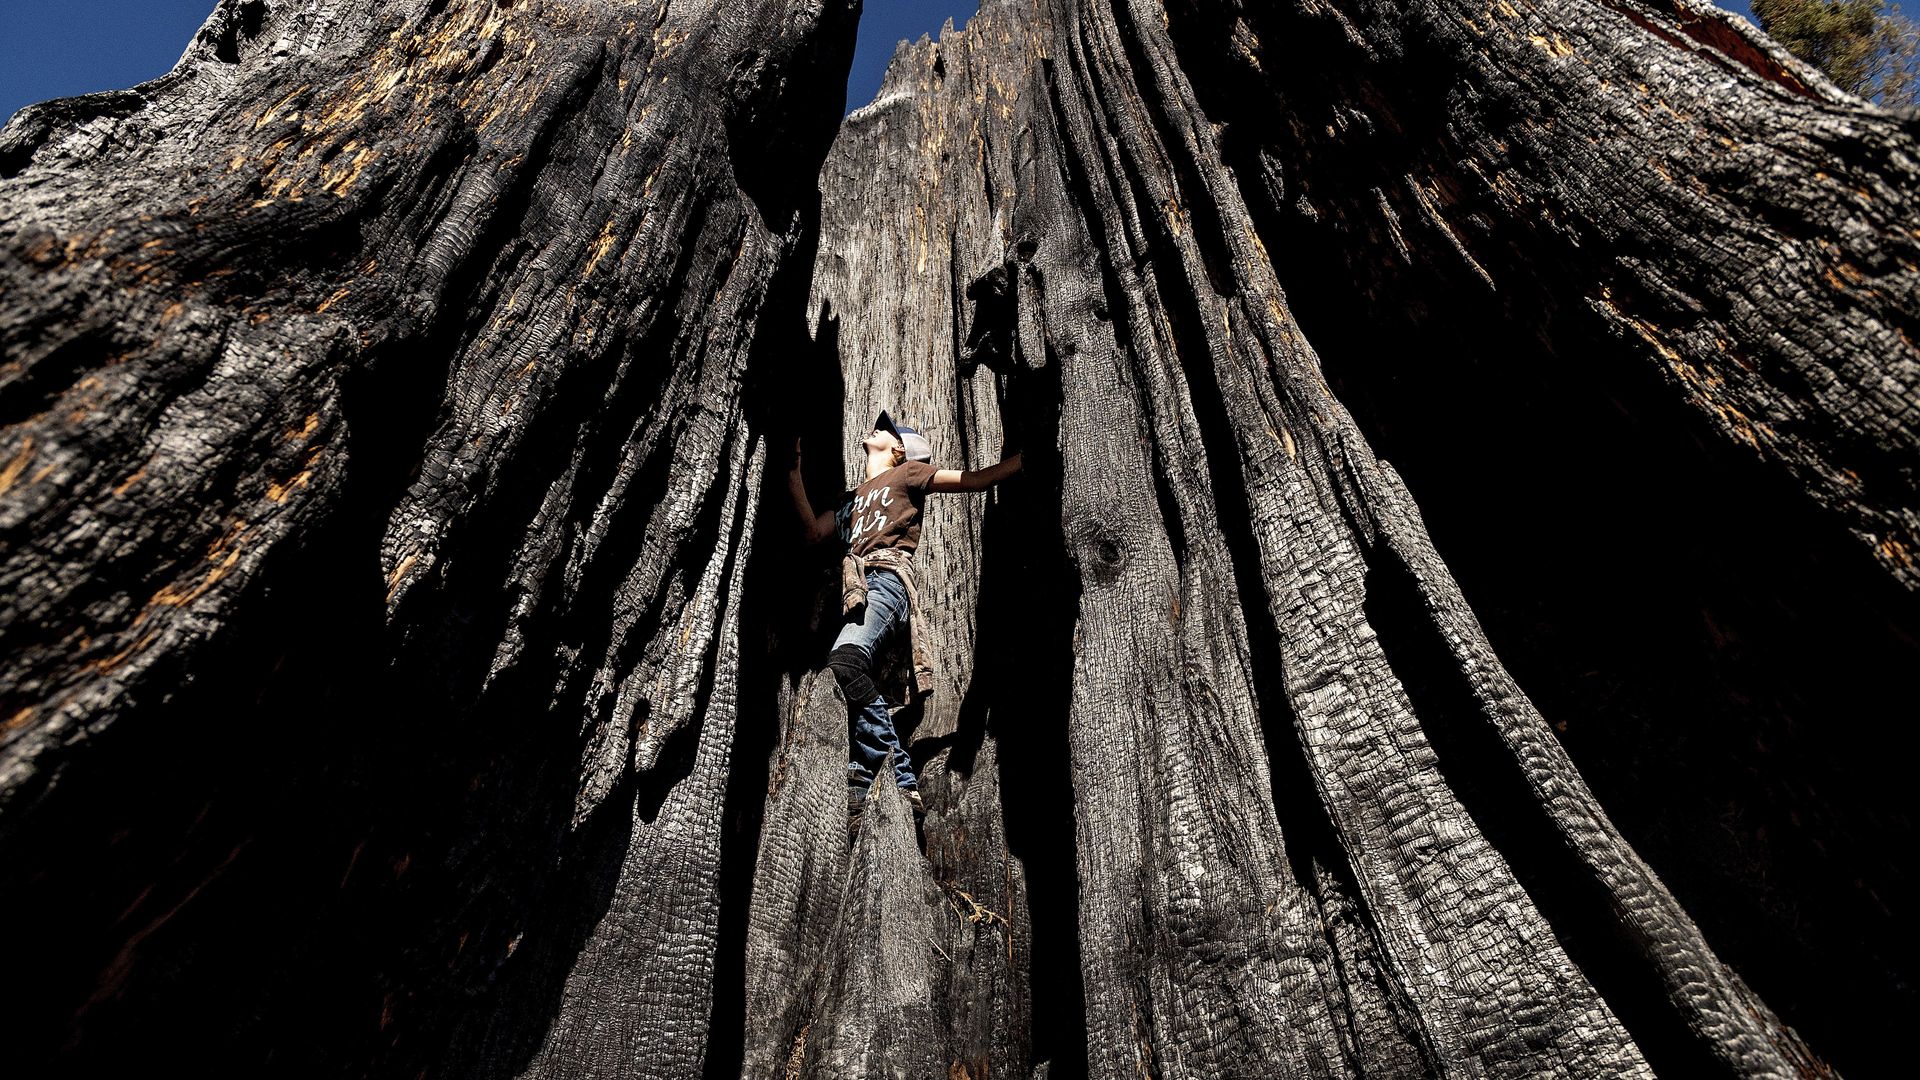 Ashtyn Perry, 13, climbs a scorched sequoia tree in Sequoia Crest, Calif. Photo: Noah Berger